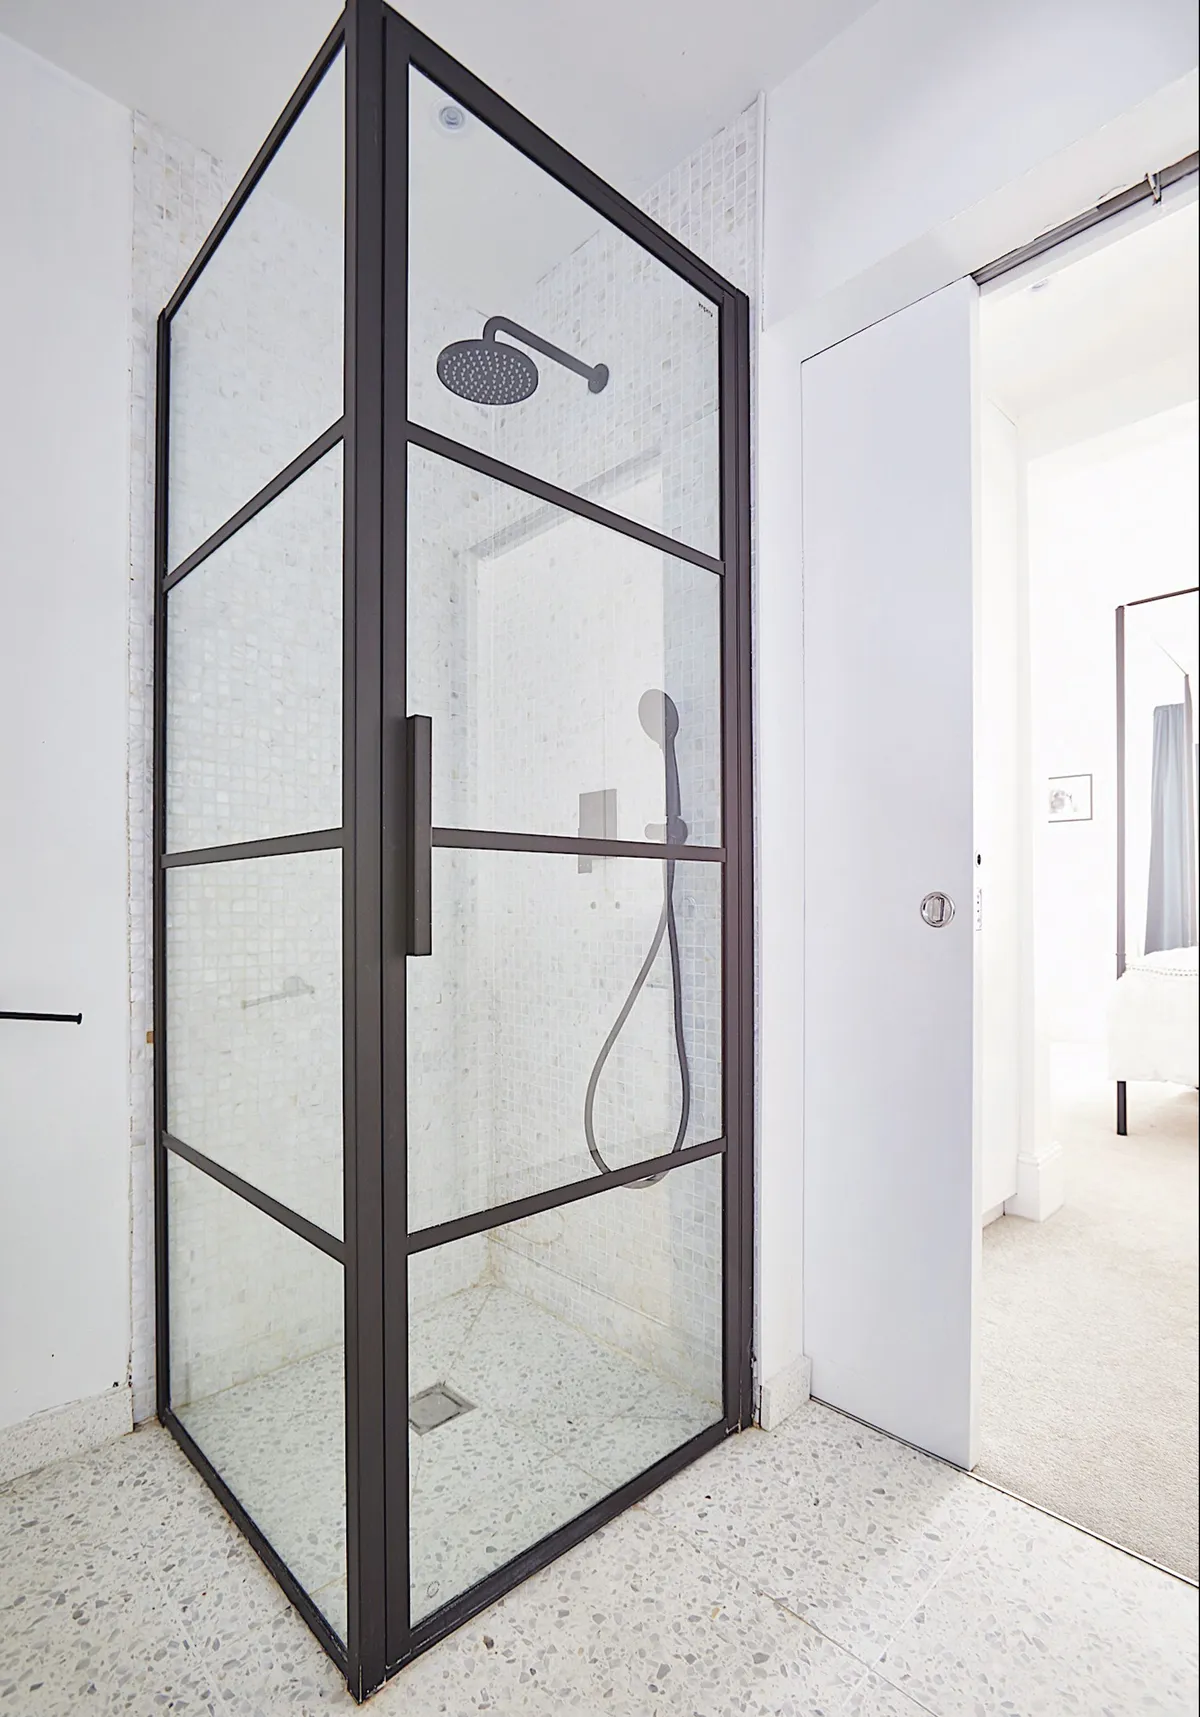 The black-framed shower screen, from Impey Showers, gives this bathroom a polished look